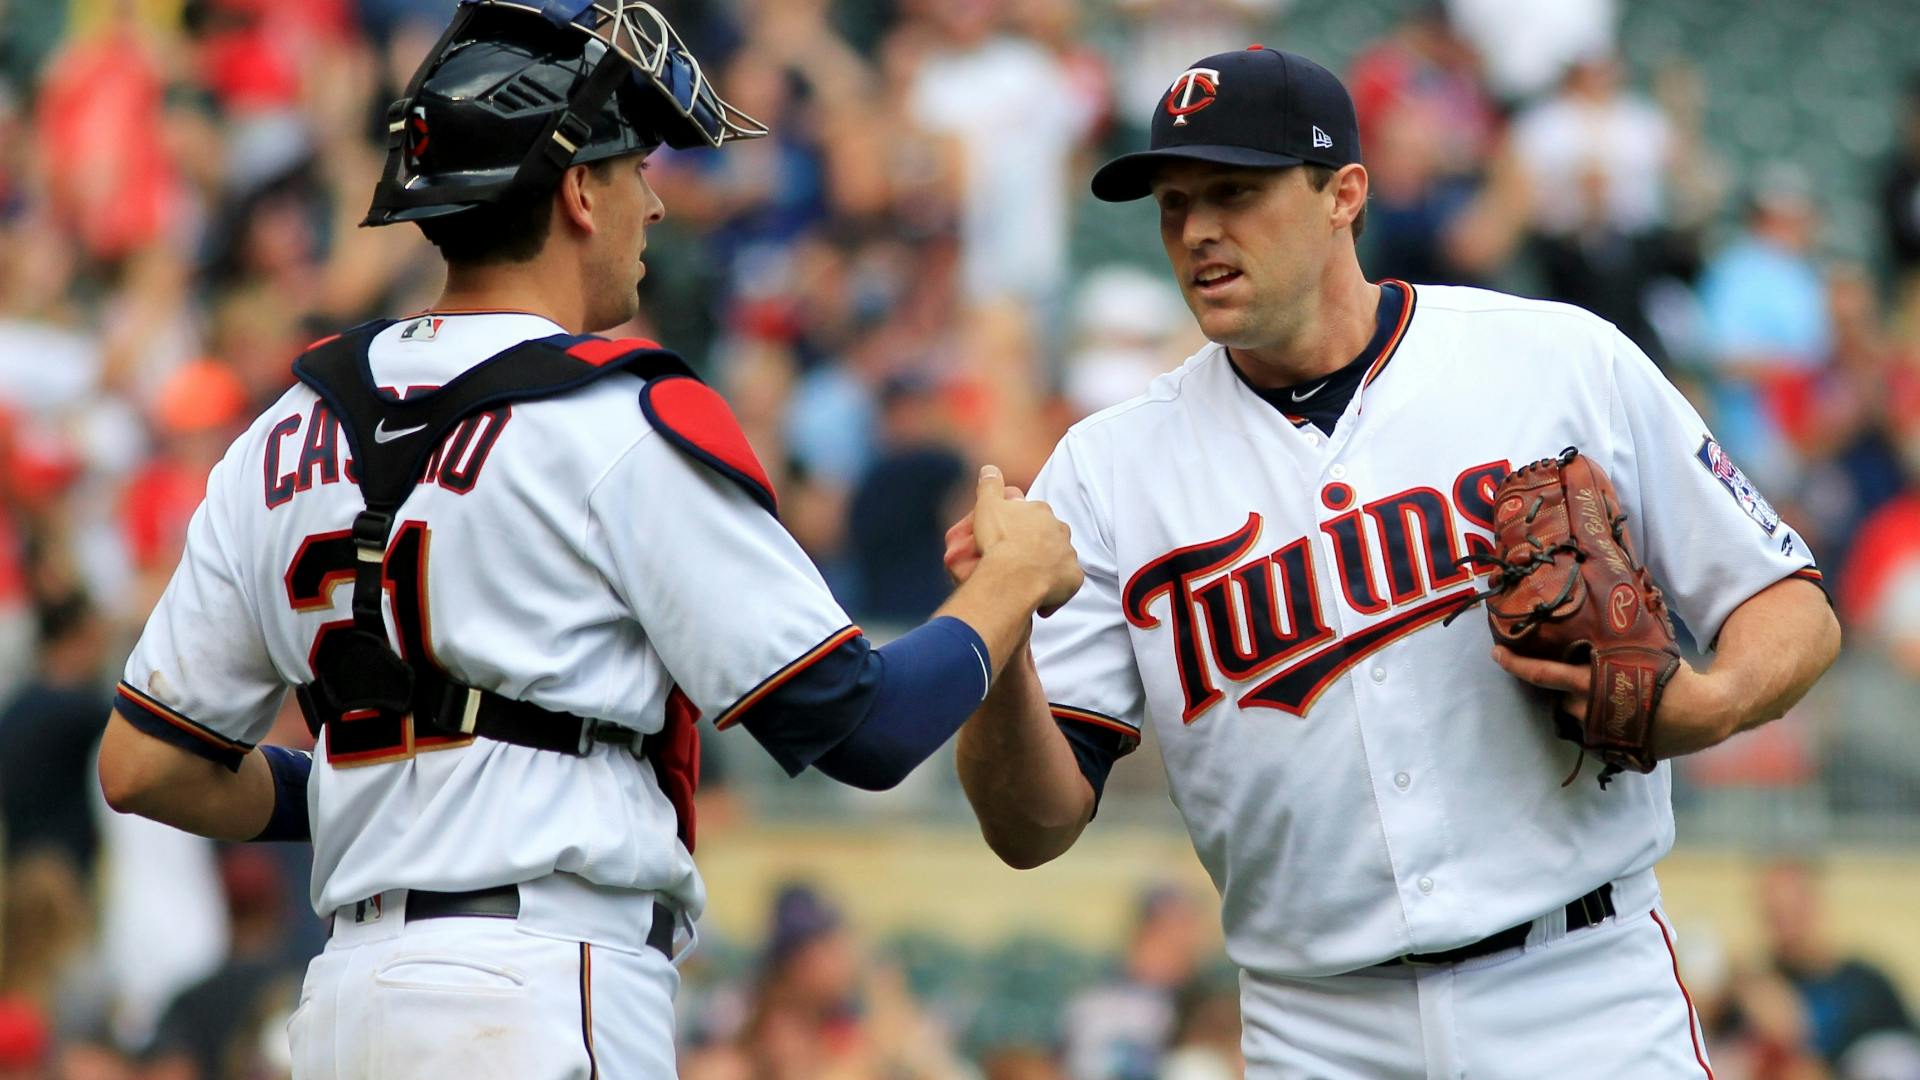 Twins reliever Matt Belisle, who earned his first save in five years Sunday, says the team's bullpen remains confident, even without All-Star closer Brandon Kintzler.